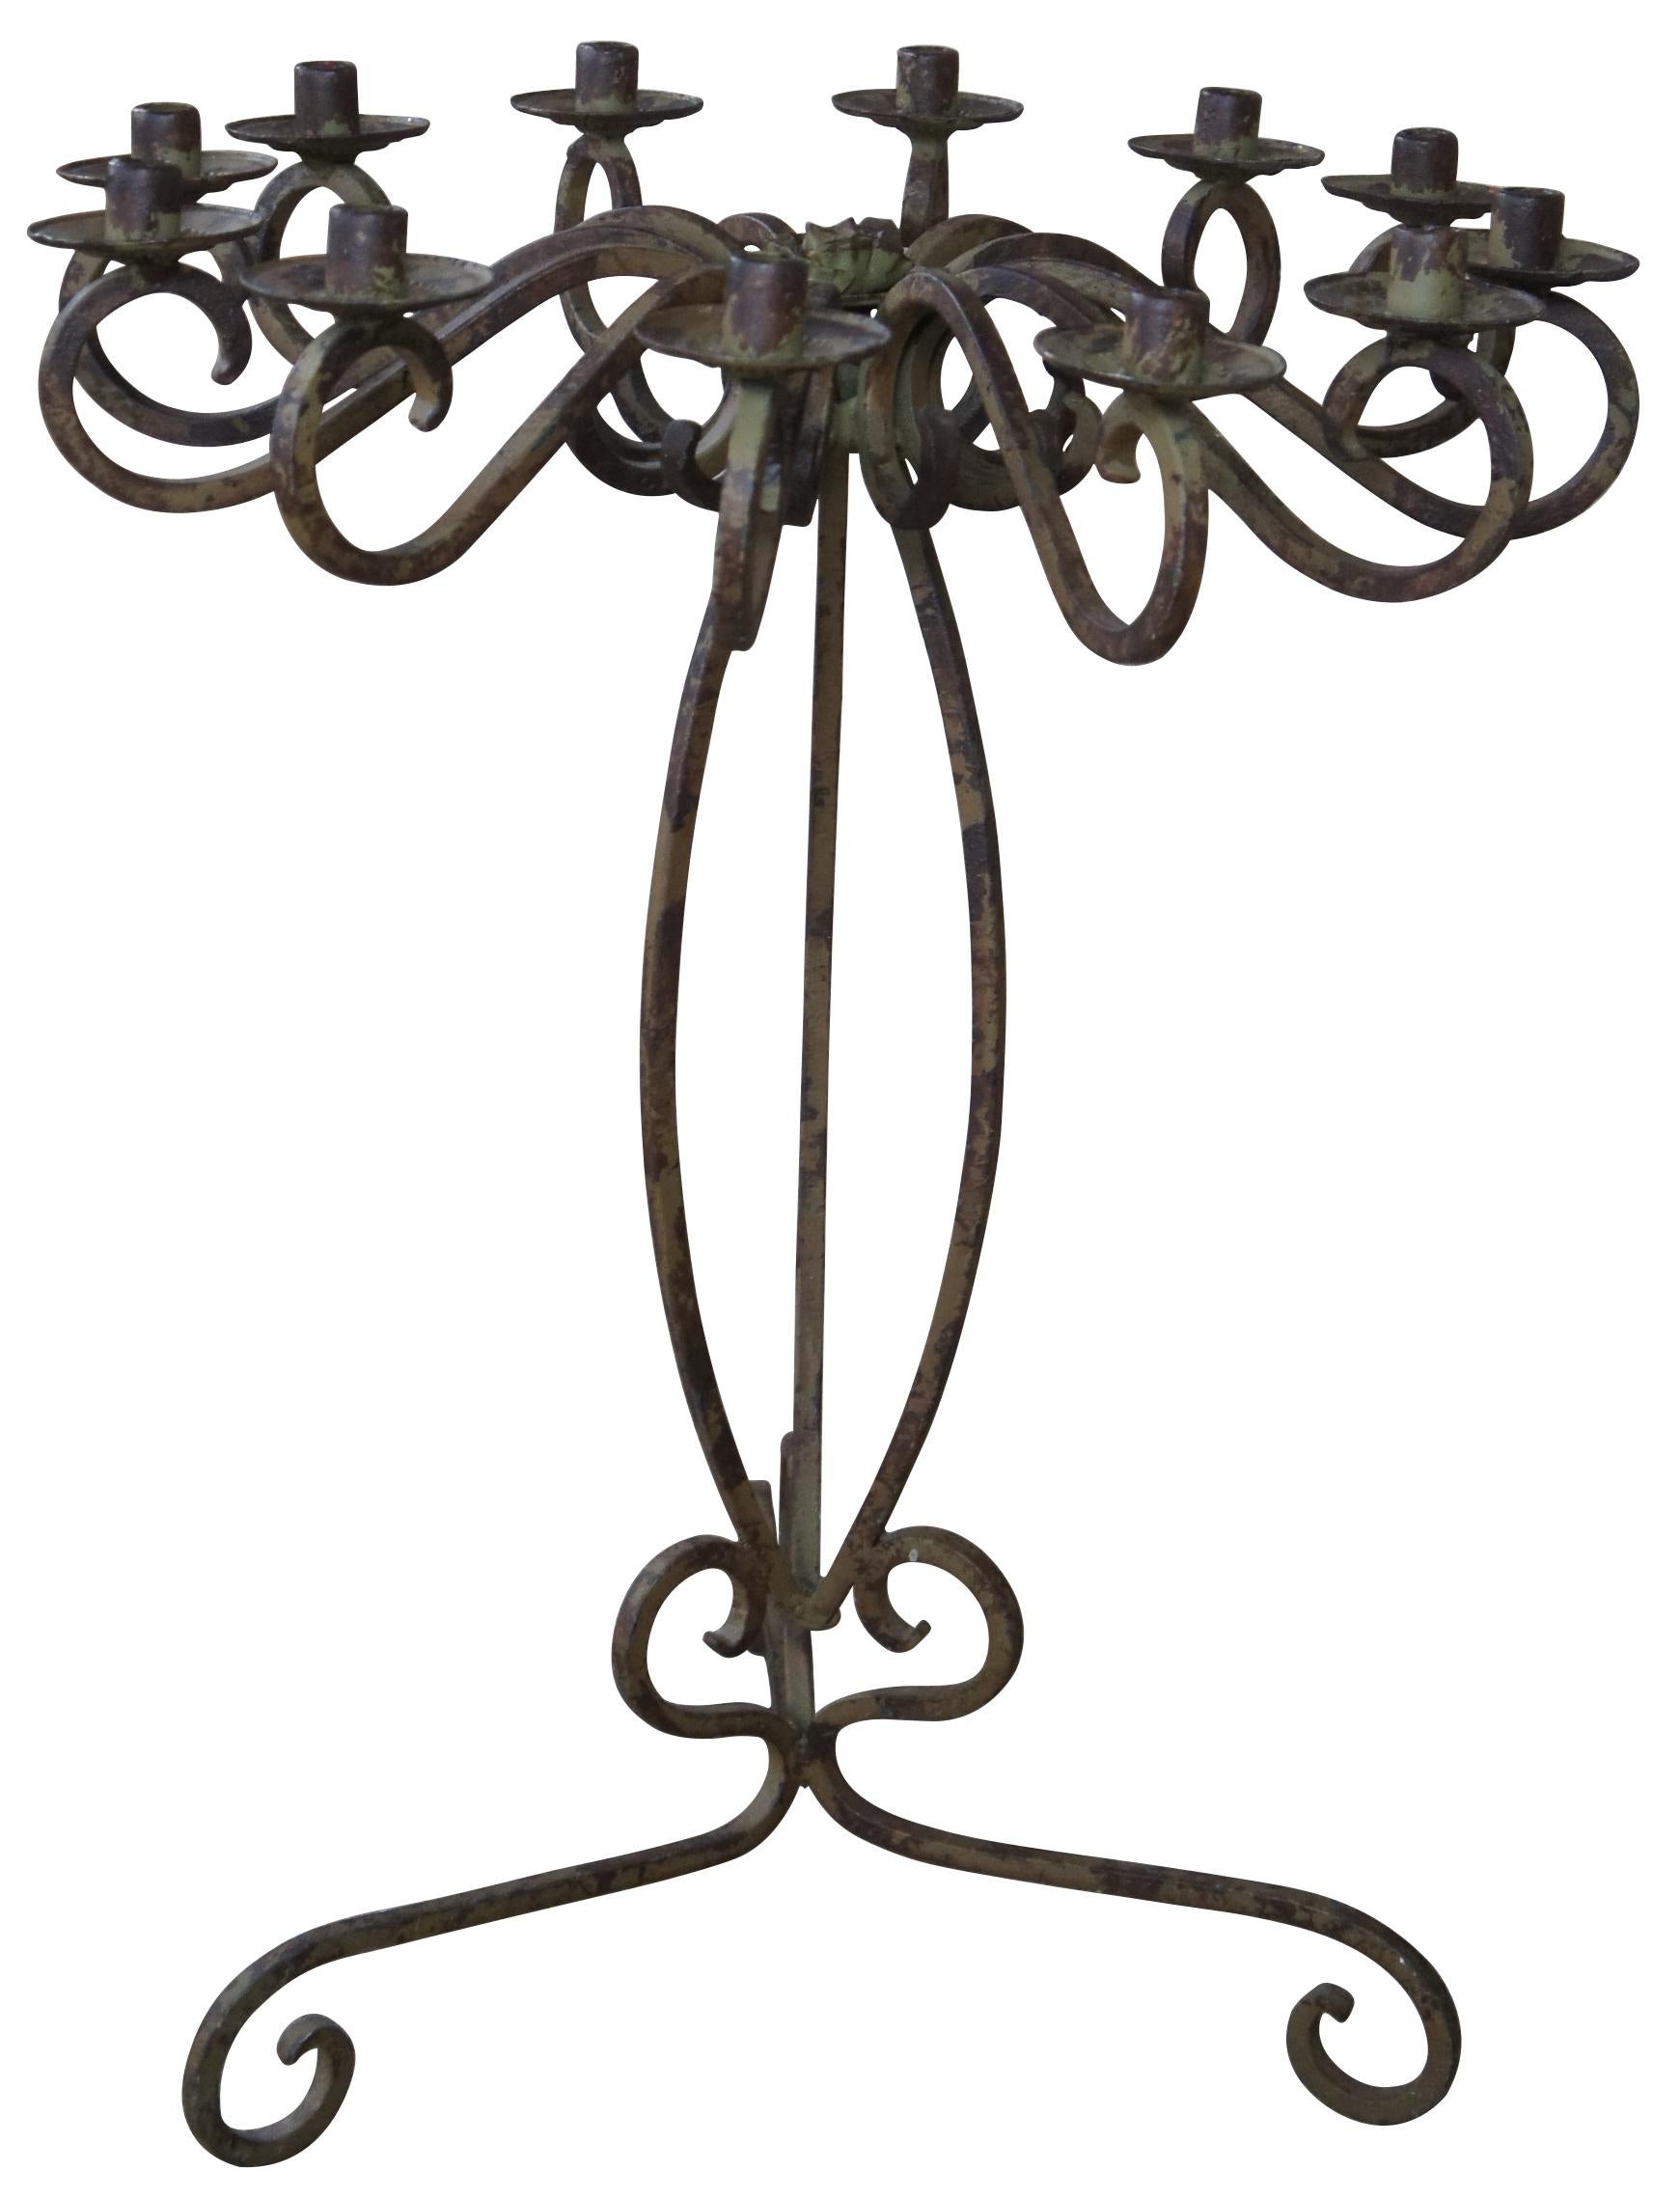 Vintage French Scrolled Iron 12 Light Altar Floor Pedestal Candelabra Gothic In Good Condition For Sale In Dayton, OH